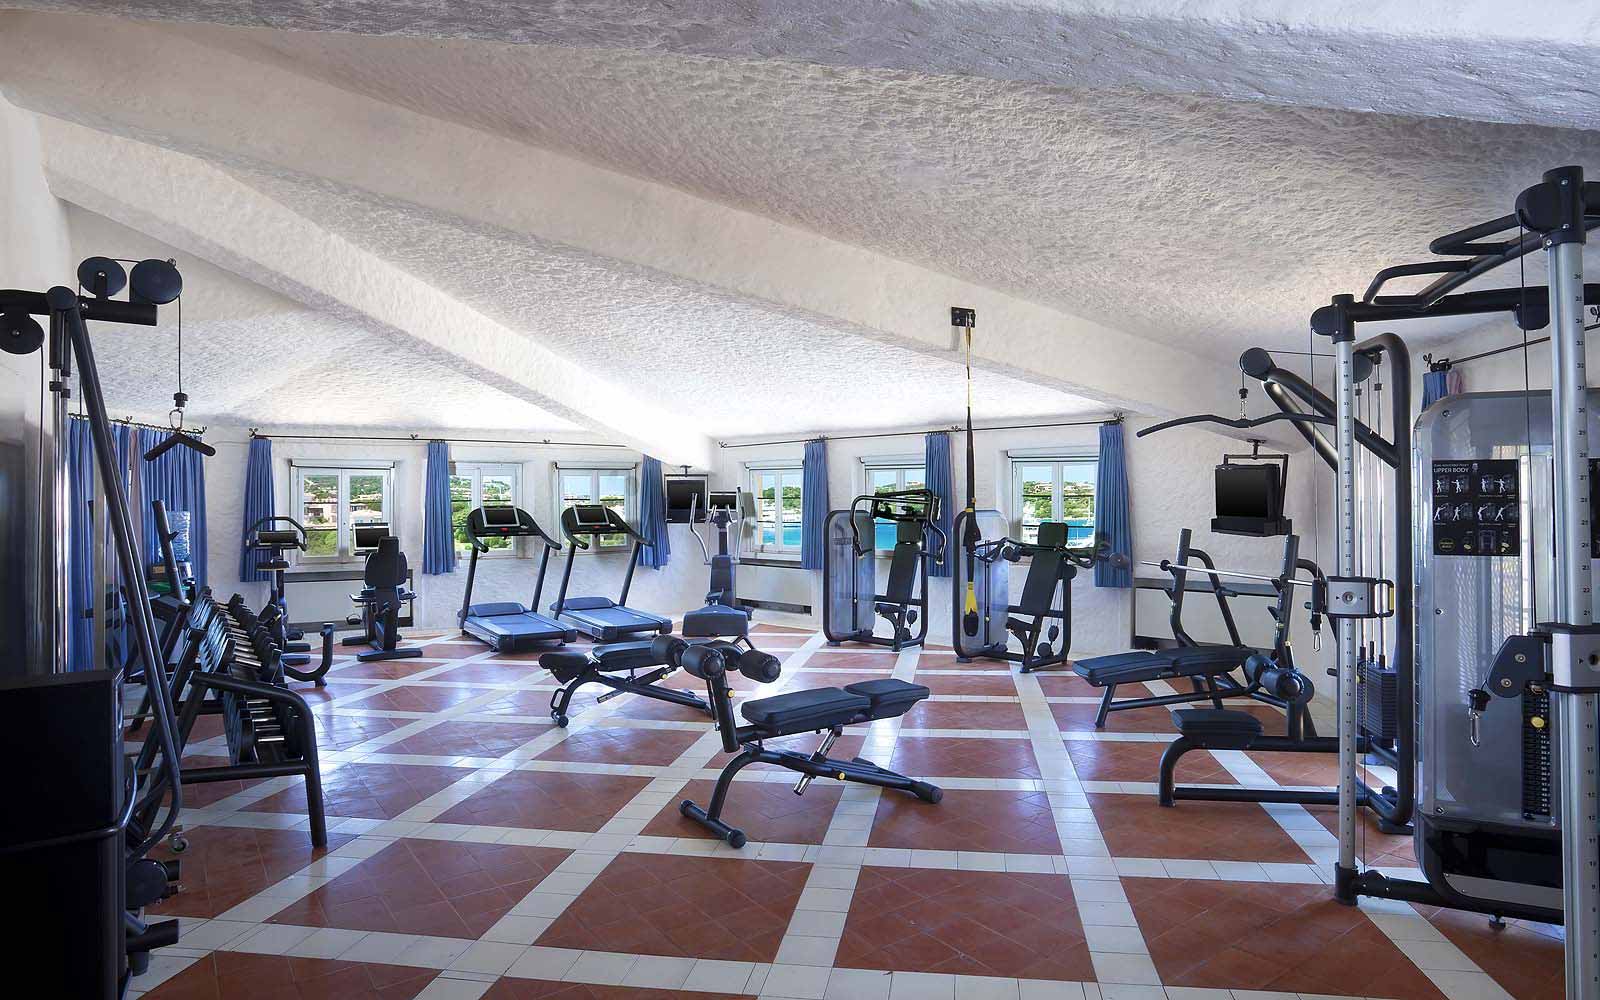 Fitness centre at the Hotel Cervo